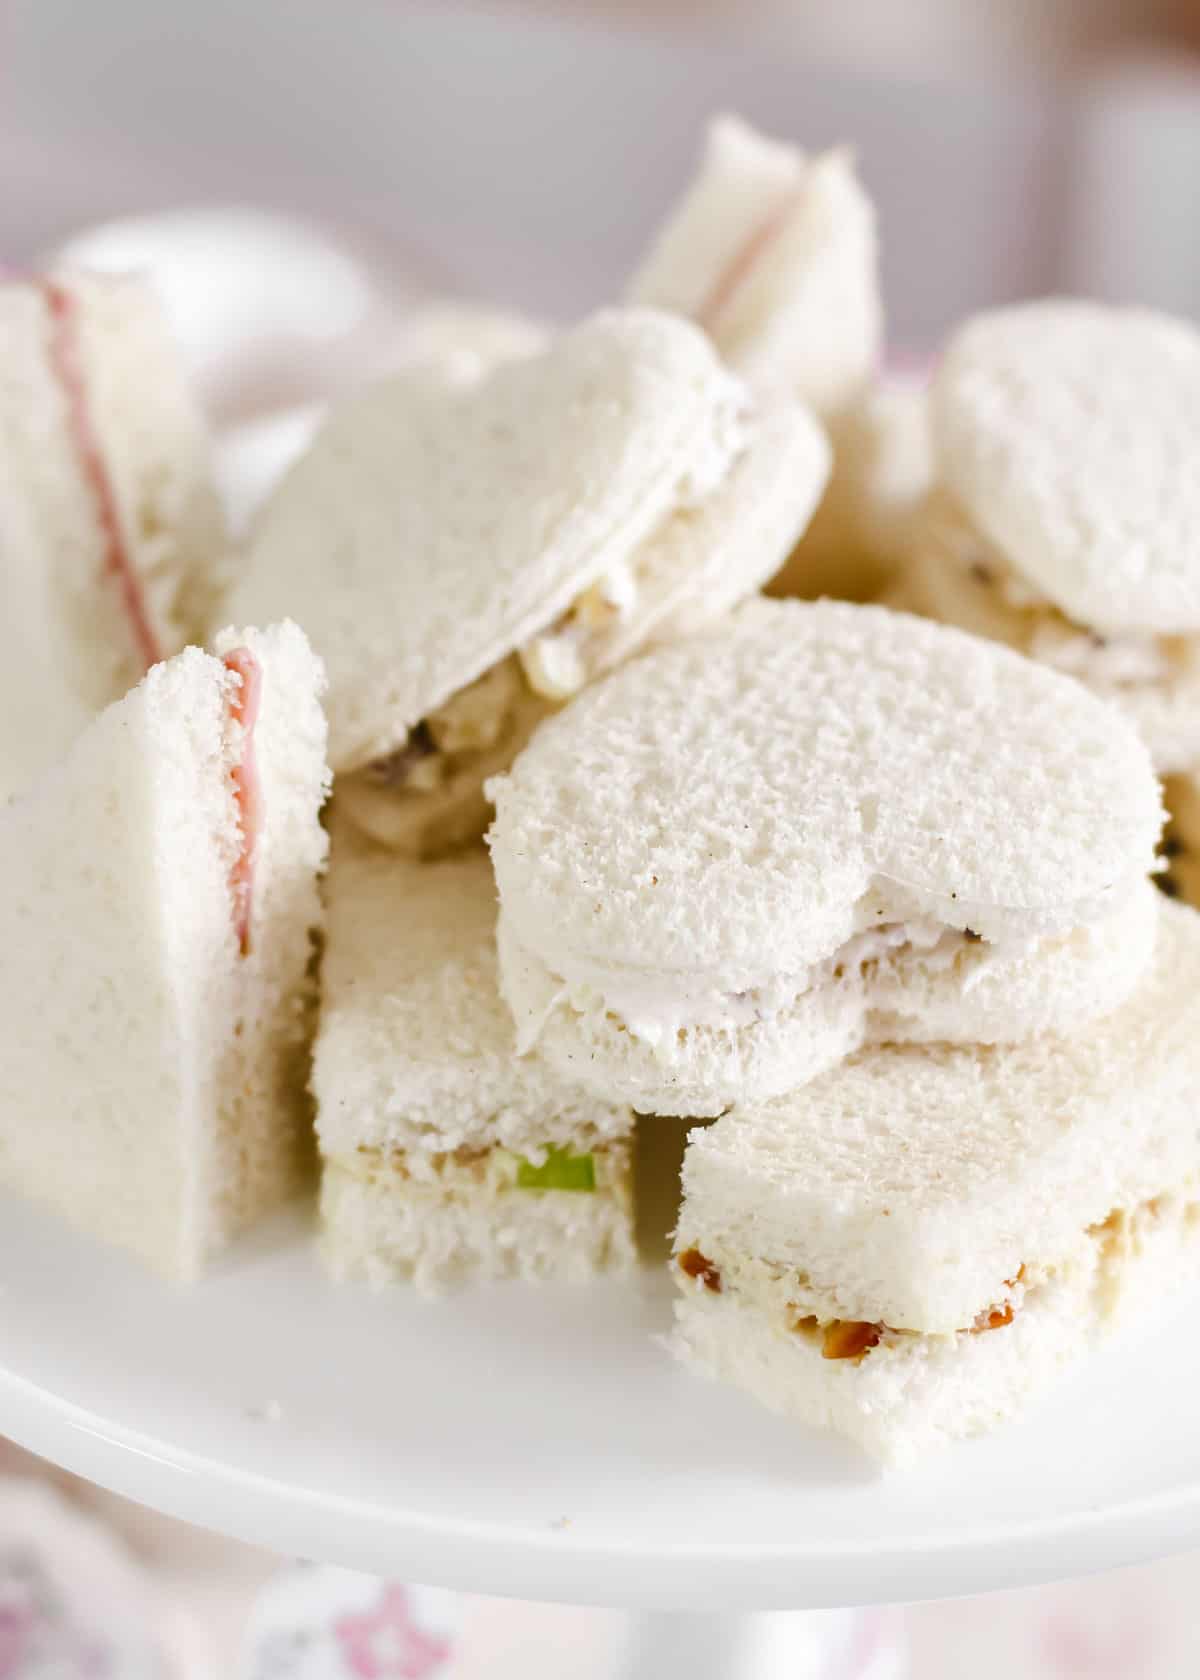 tea party finger sandwiches cut into different shapes, piled on white dish.